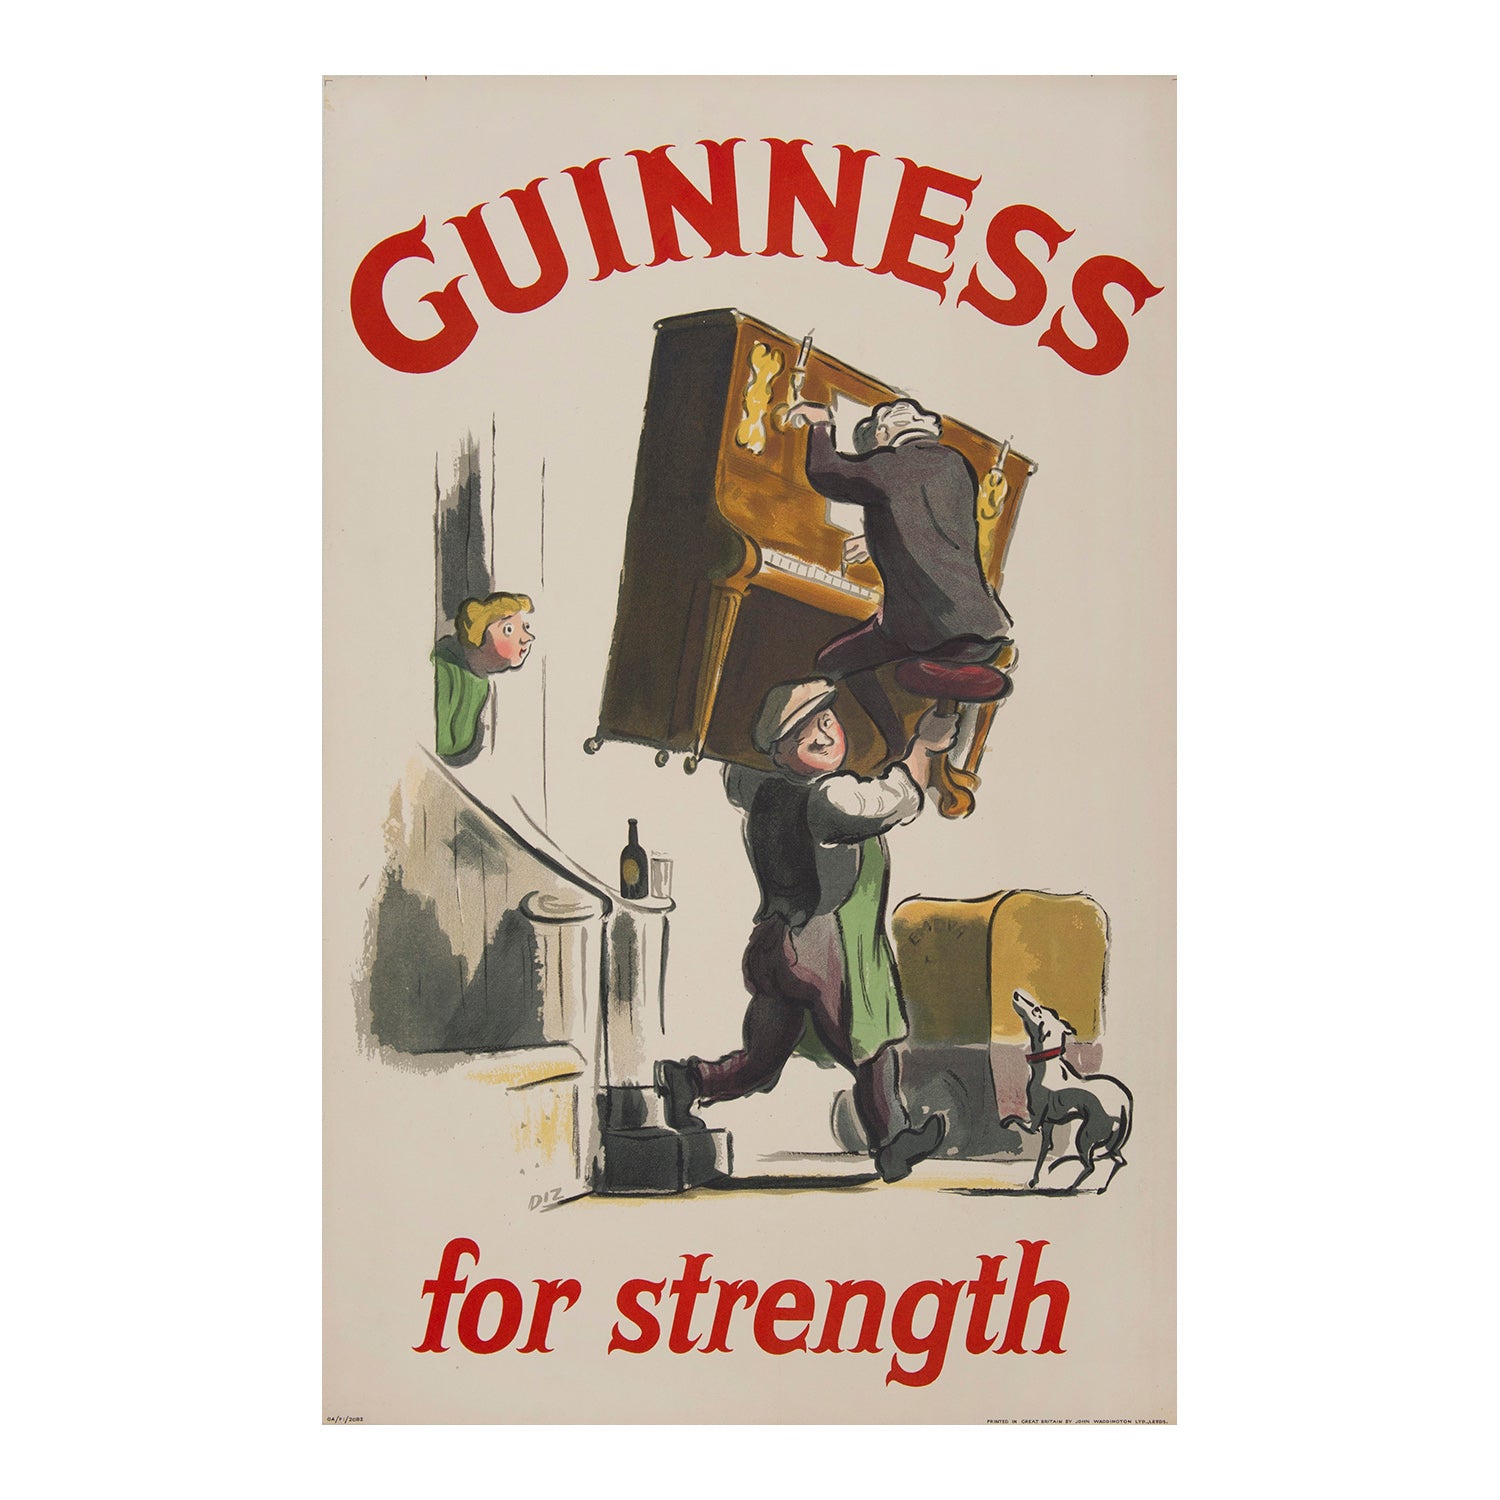 Original poster Guinness for Strength, 1953, Edward Ardizzone. Depicts removal man carrying piano and pianist